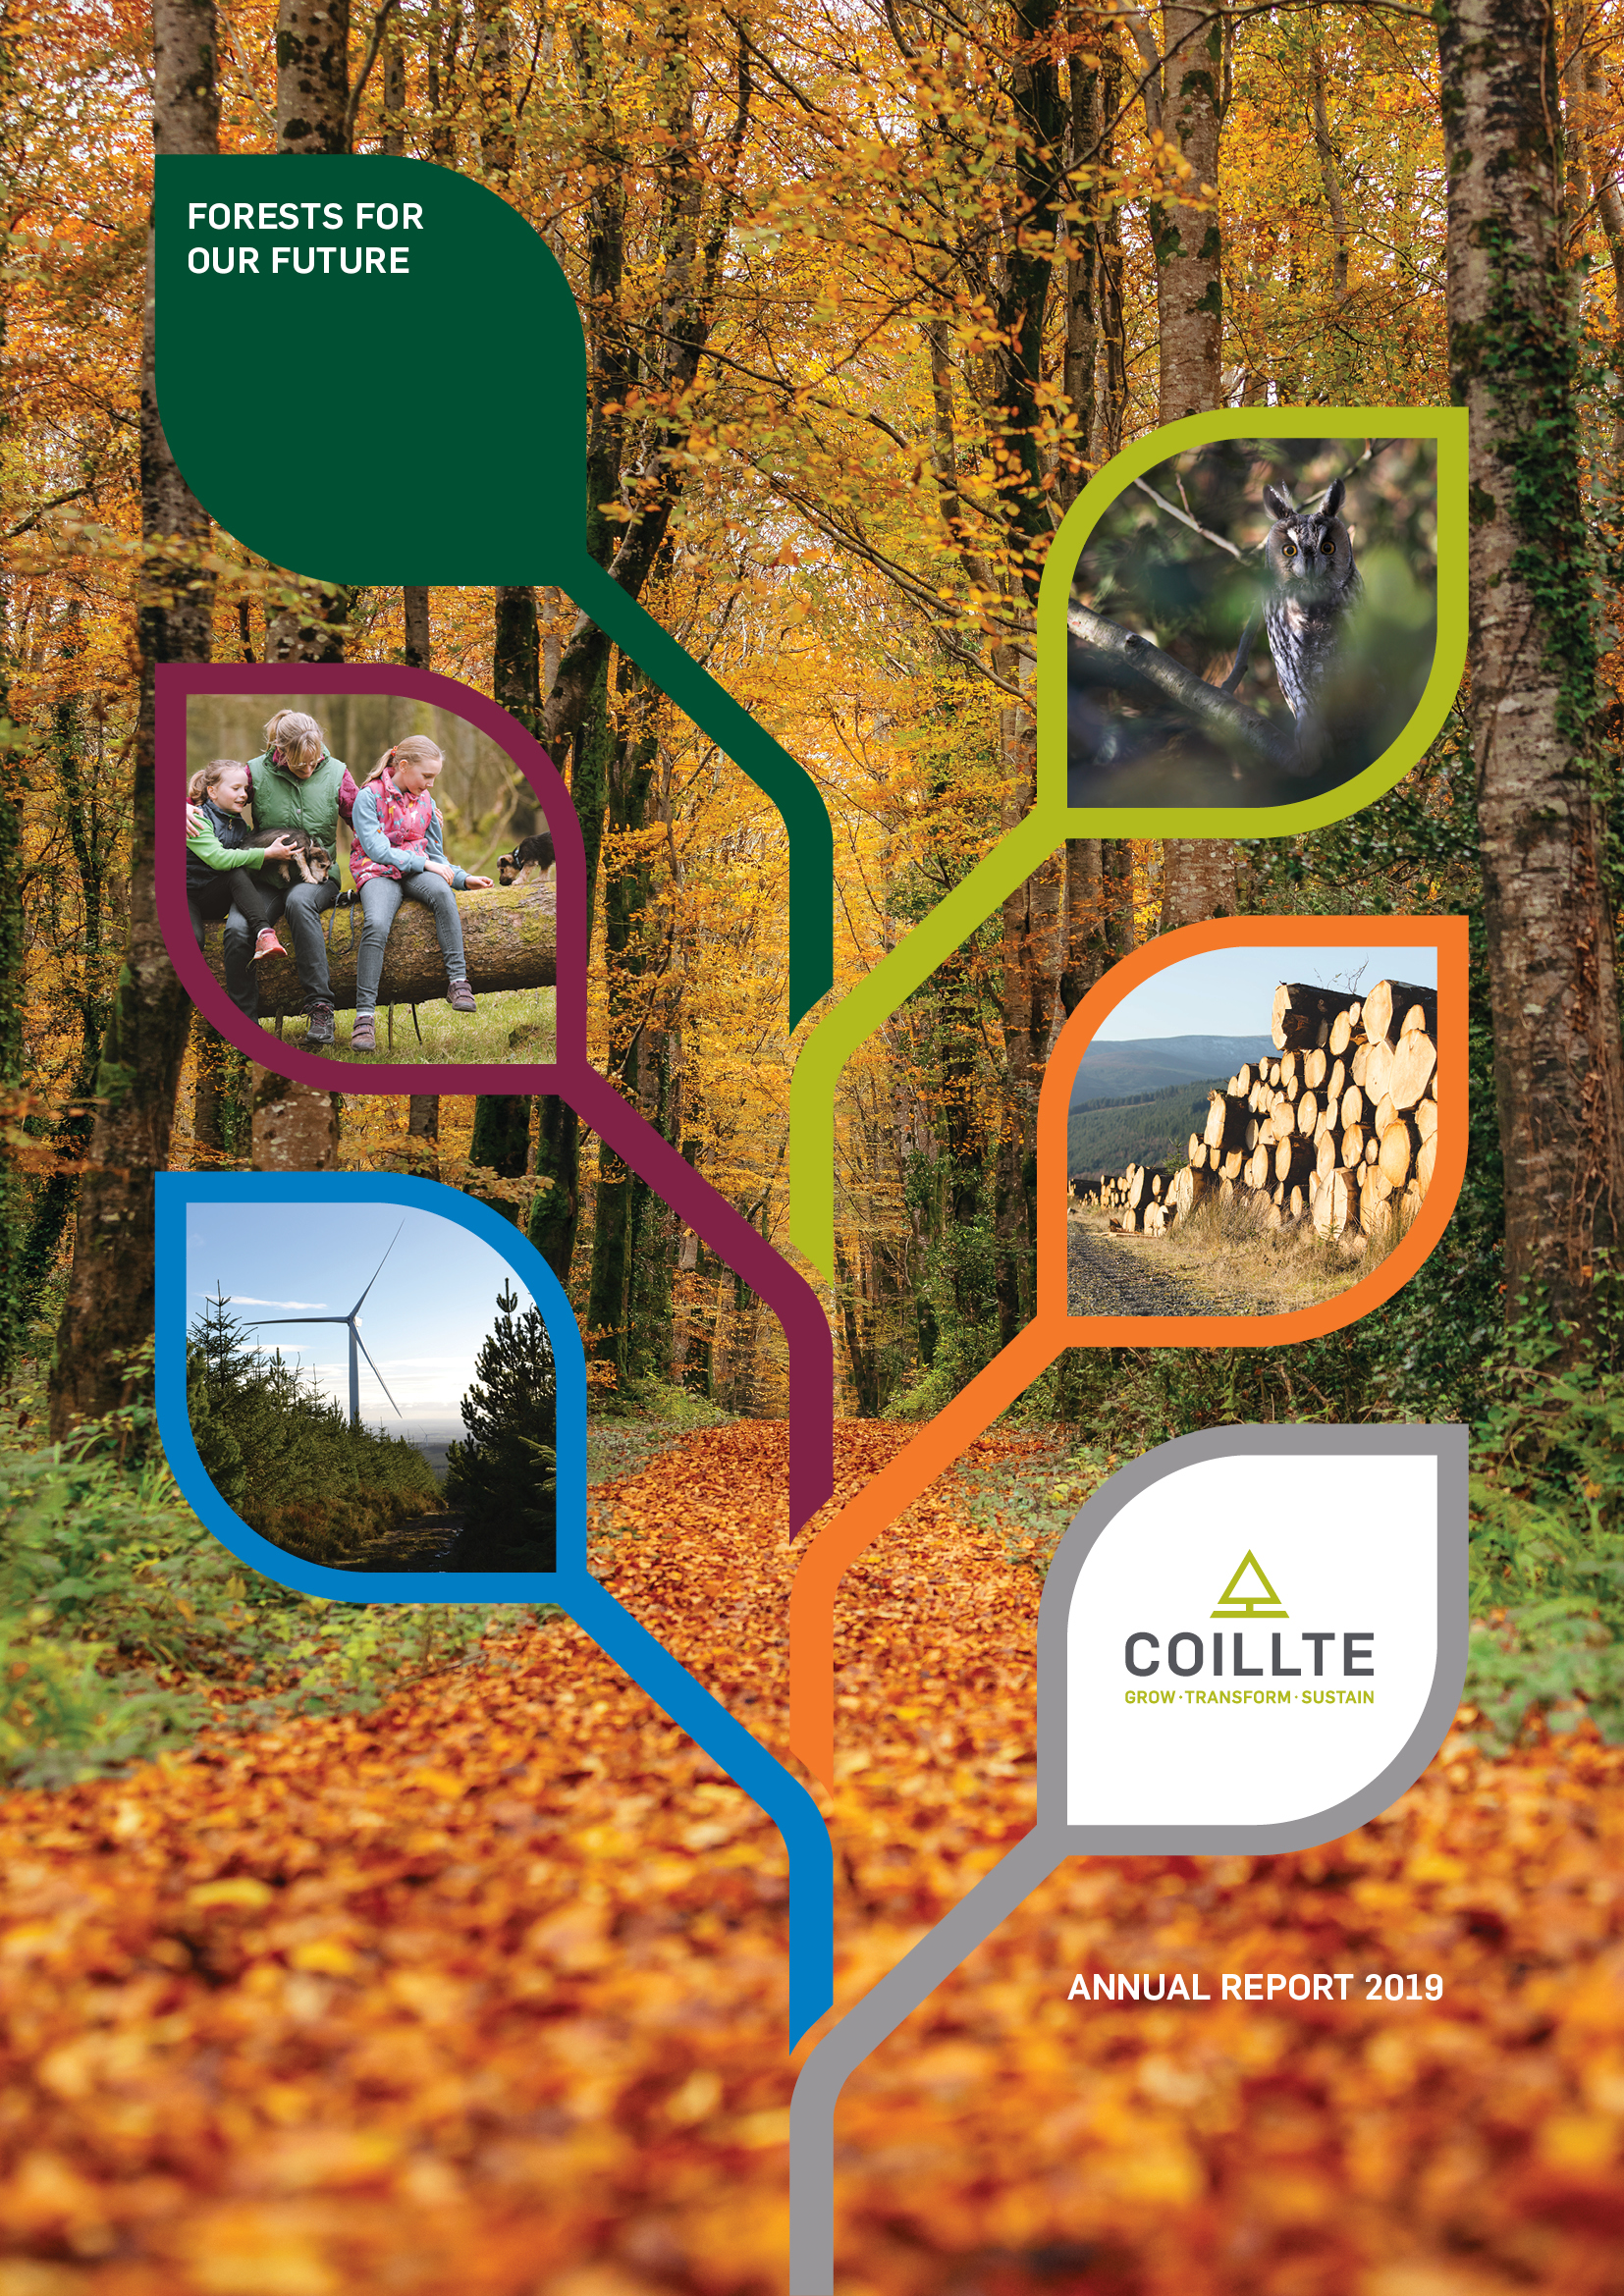 Picture of the cover of the Coillte Annual Report 2019 showing a forest pathway and the report title forests for our future